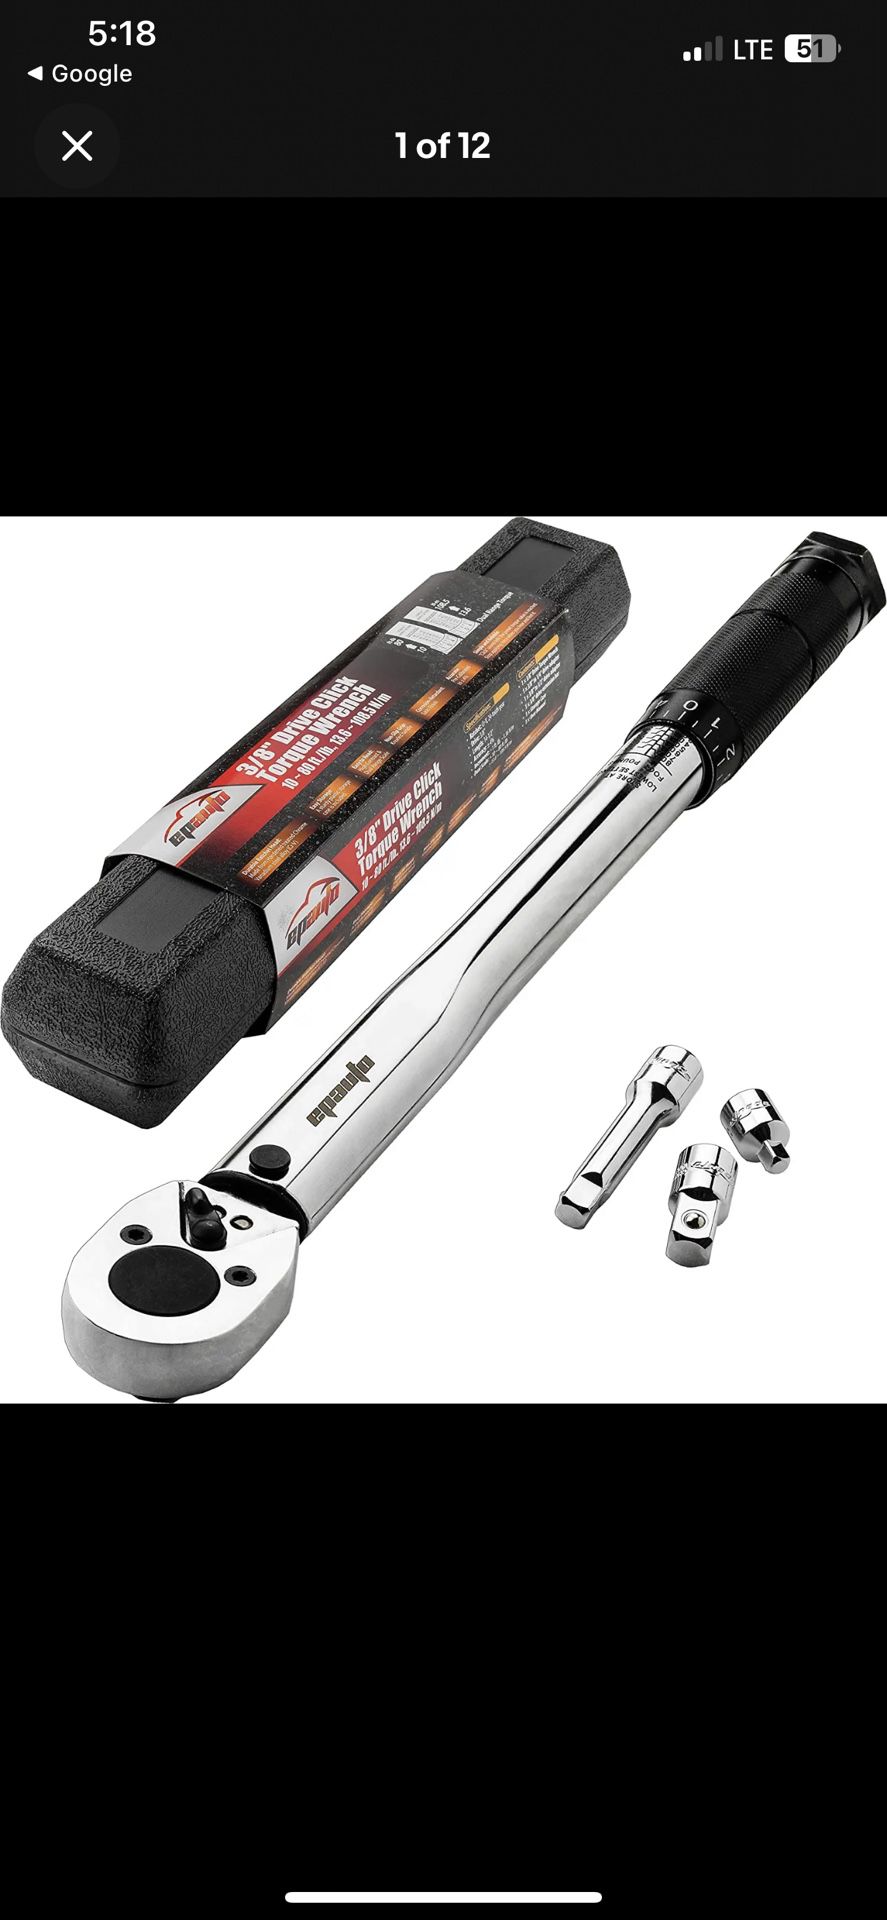 EPAuto 3/8-Inch Drive Click Torque Wrench (10-80 ft.-lb. / 13.6-108.5 Nm) 